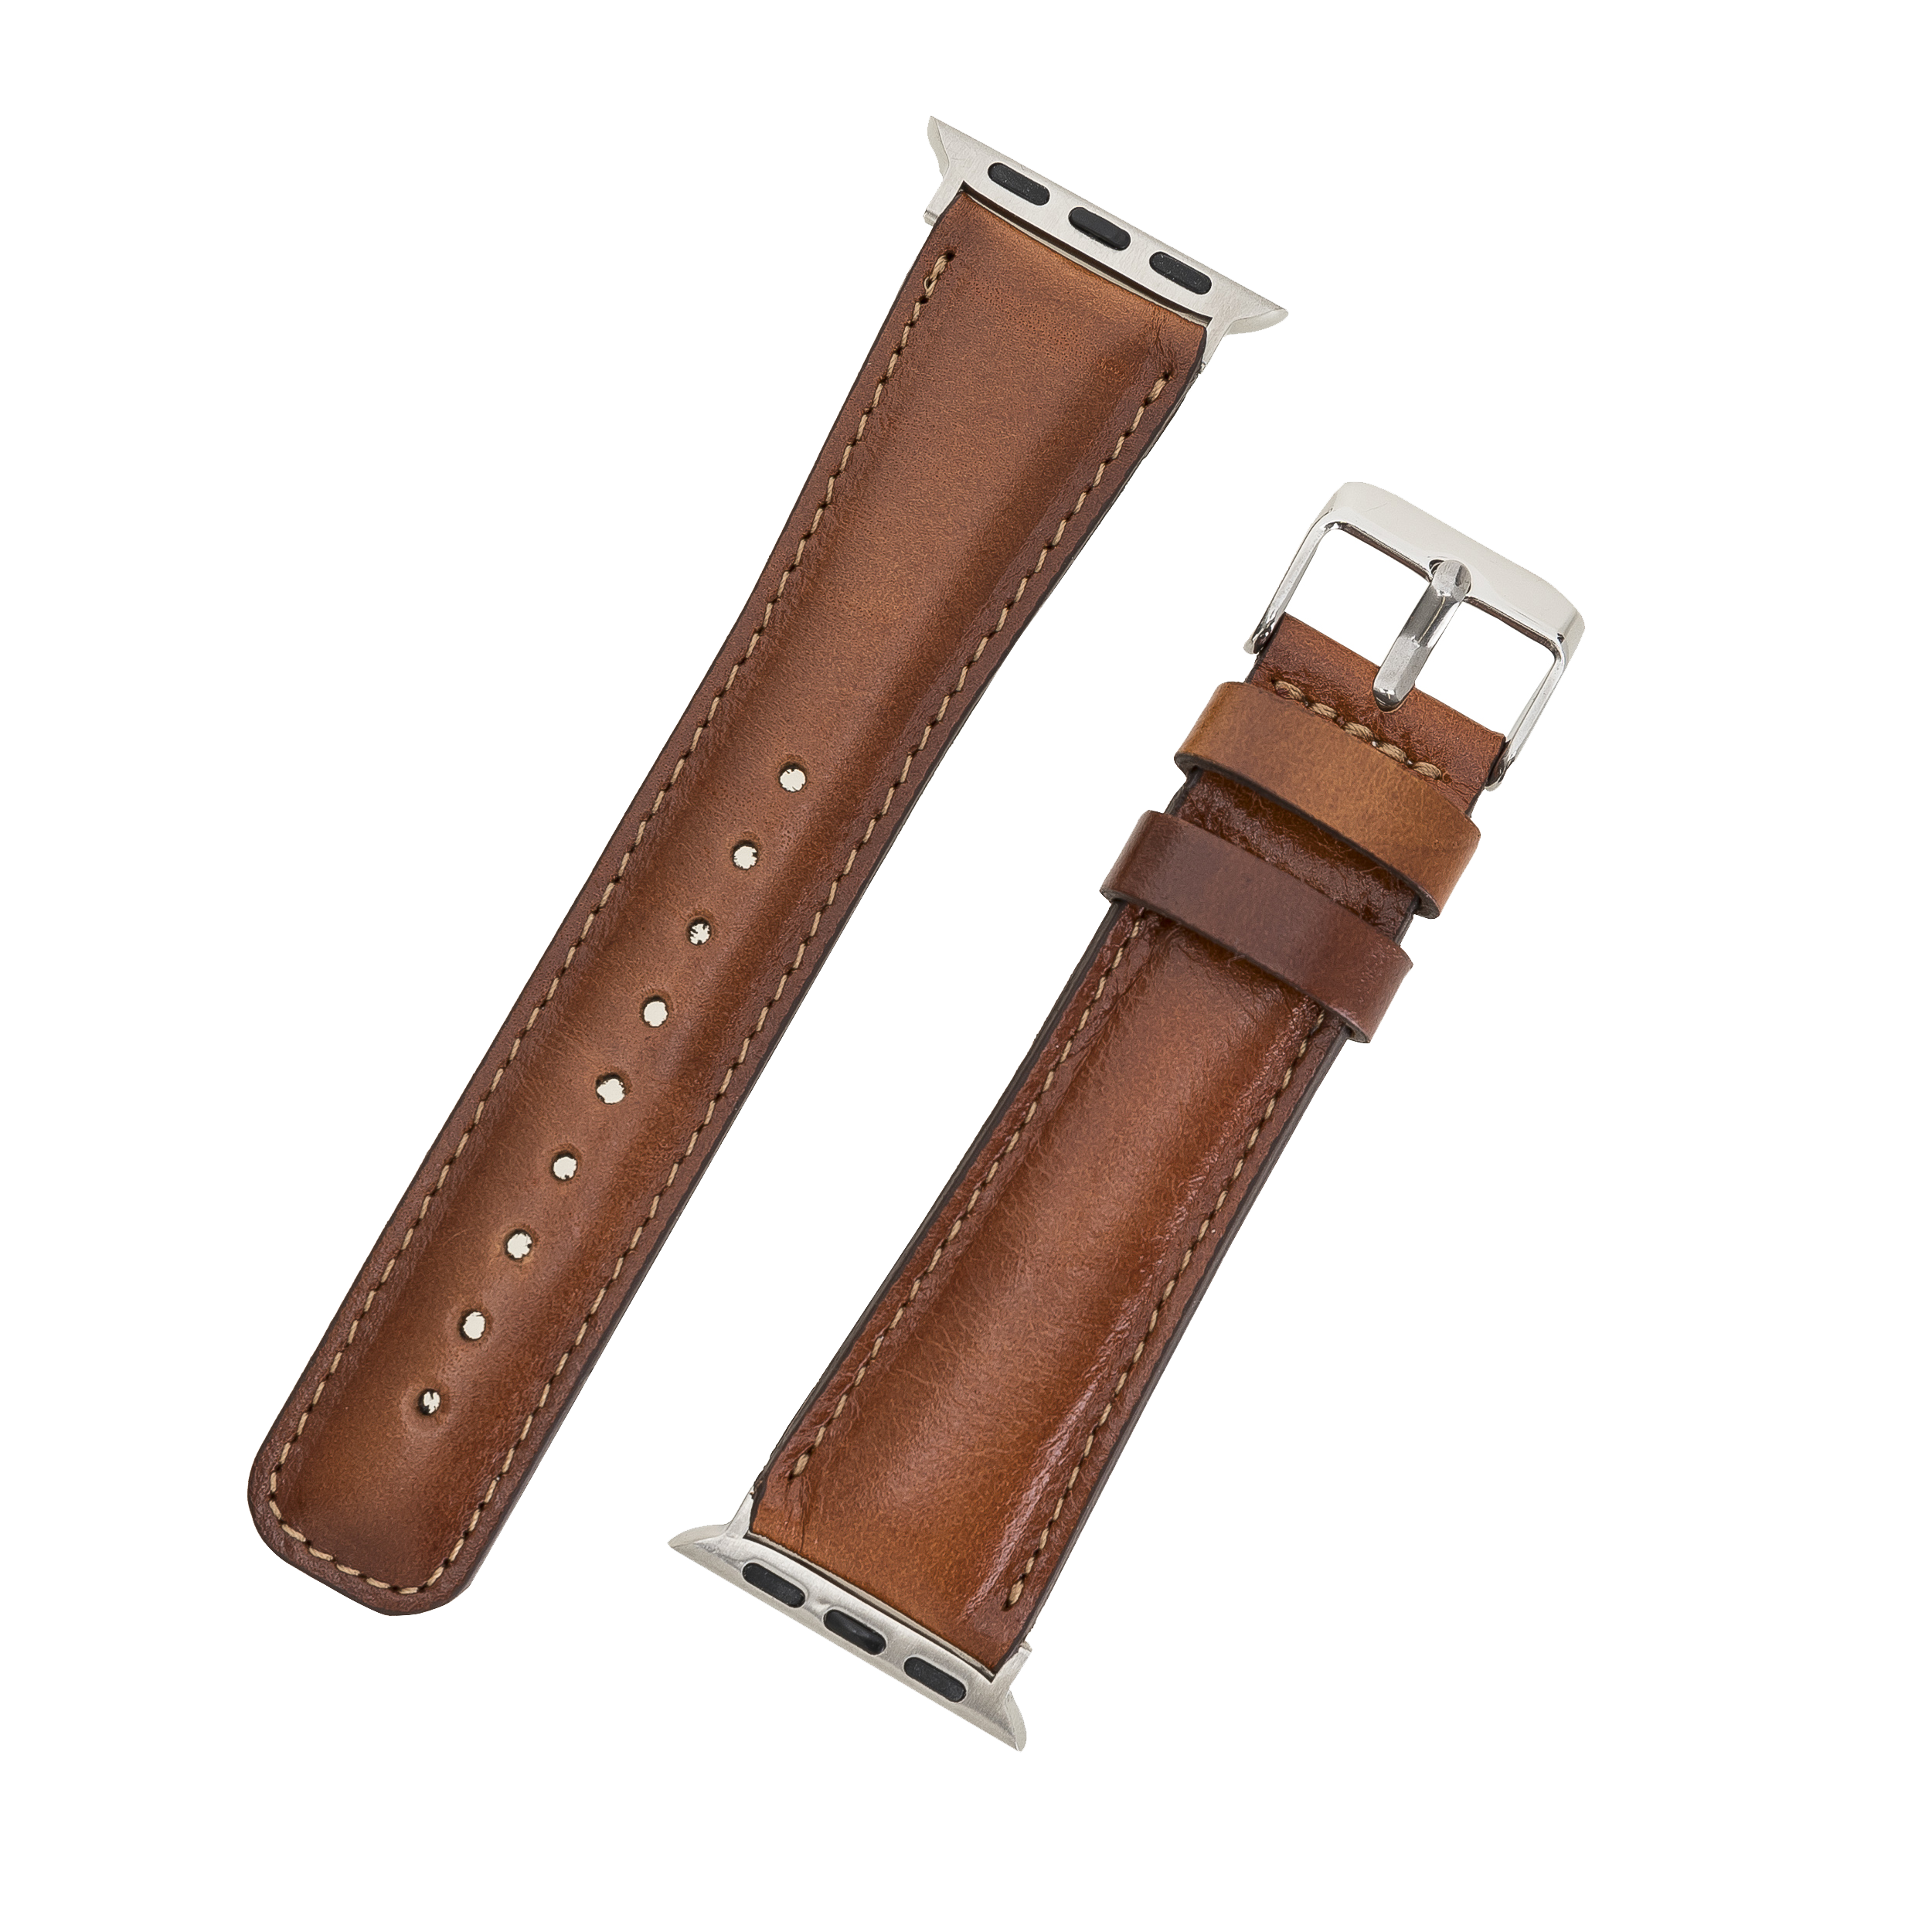 DelfiCase Liverpool Collection Leather Watch Band for Apple & Fitbit Versa Watch Band 19